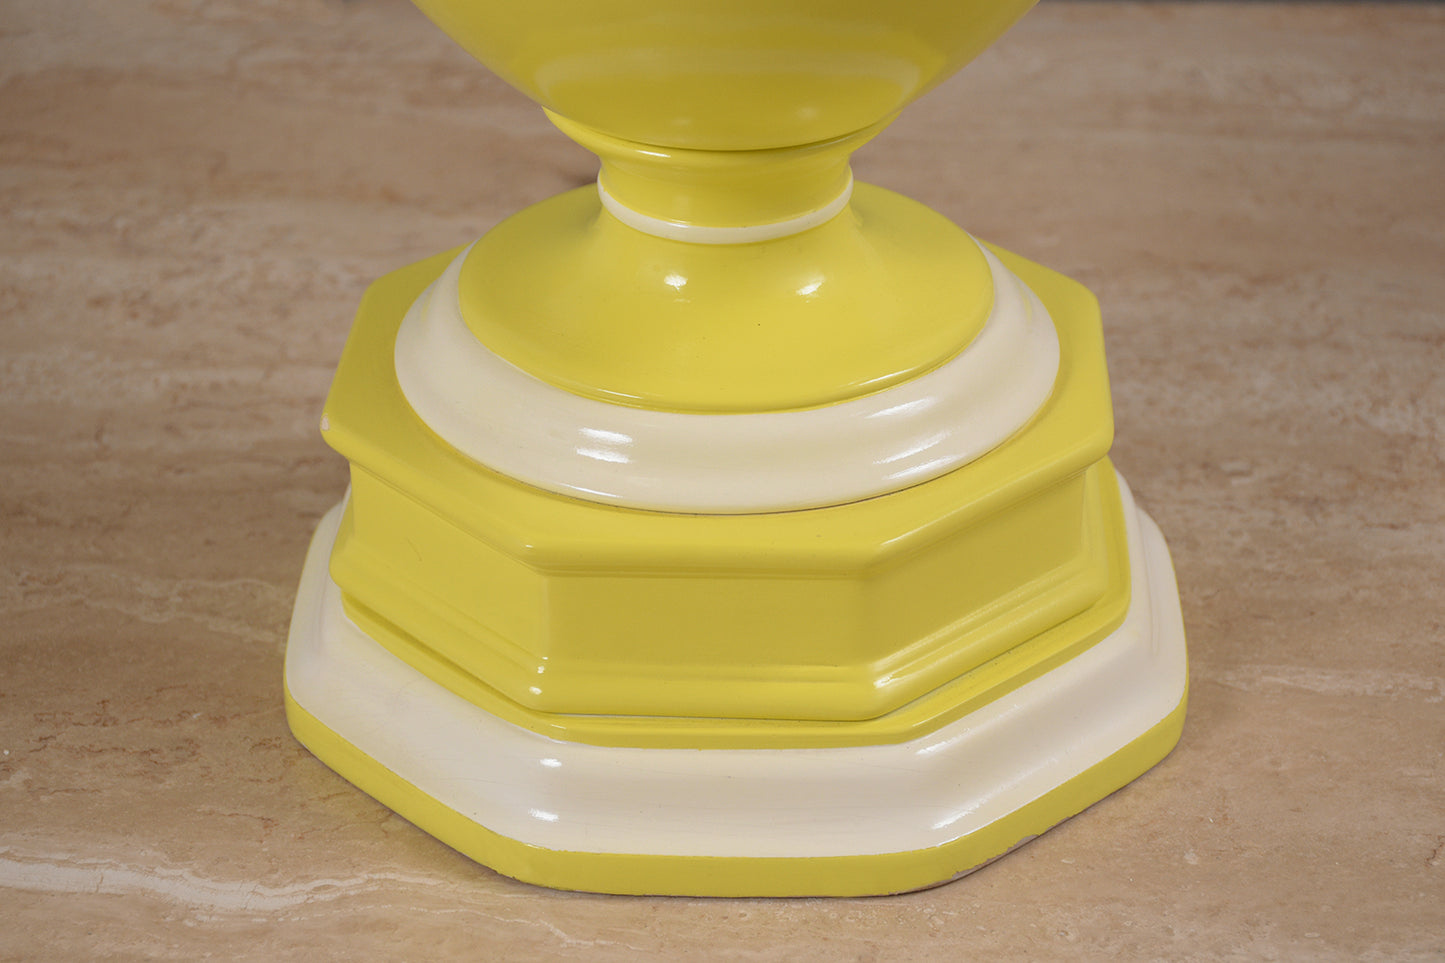 Neoclassical Style Vintage Ceramic Table Lamps in Yellow & White with New Shades - U.S Wired